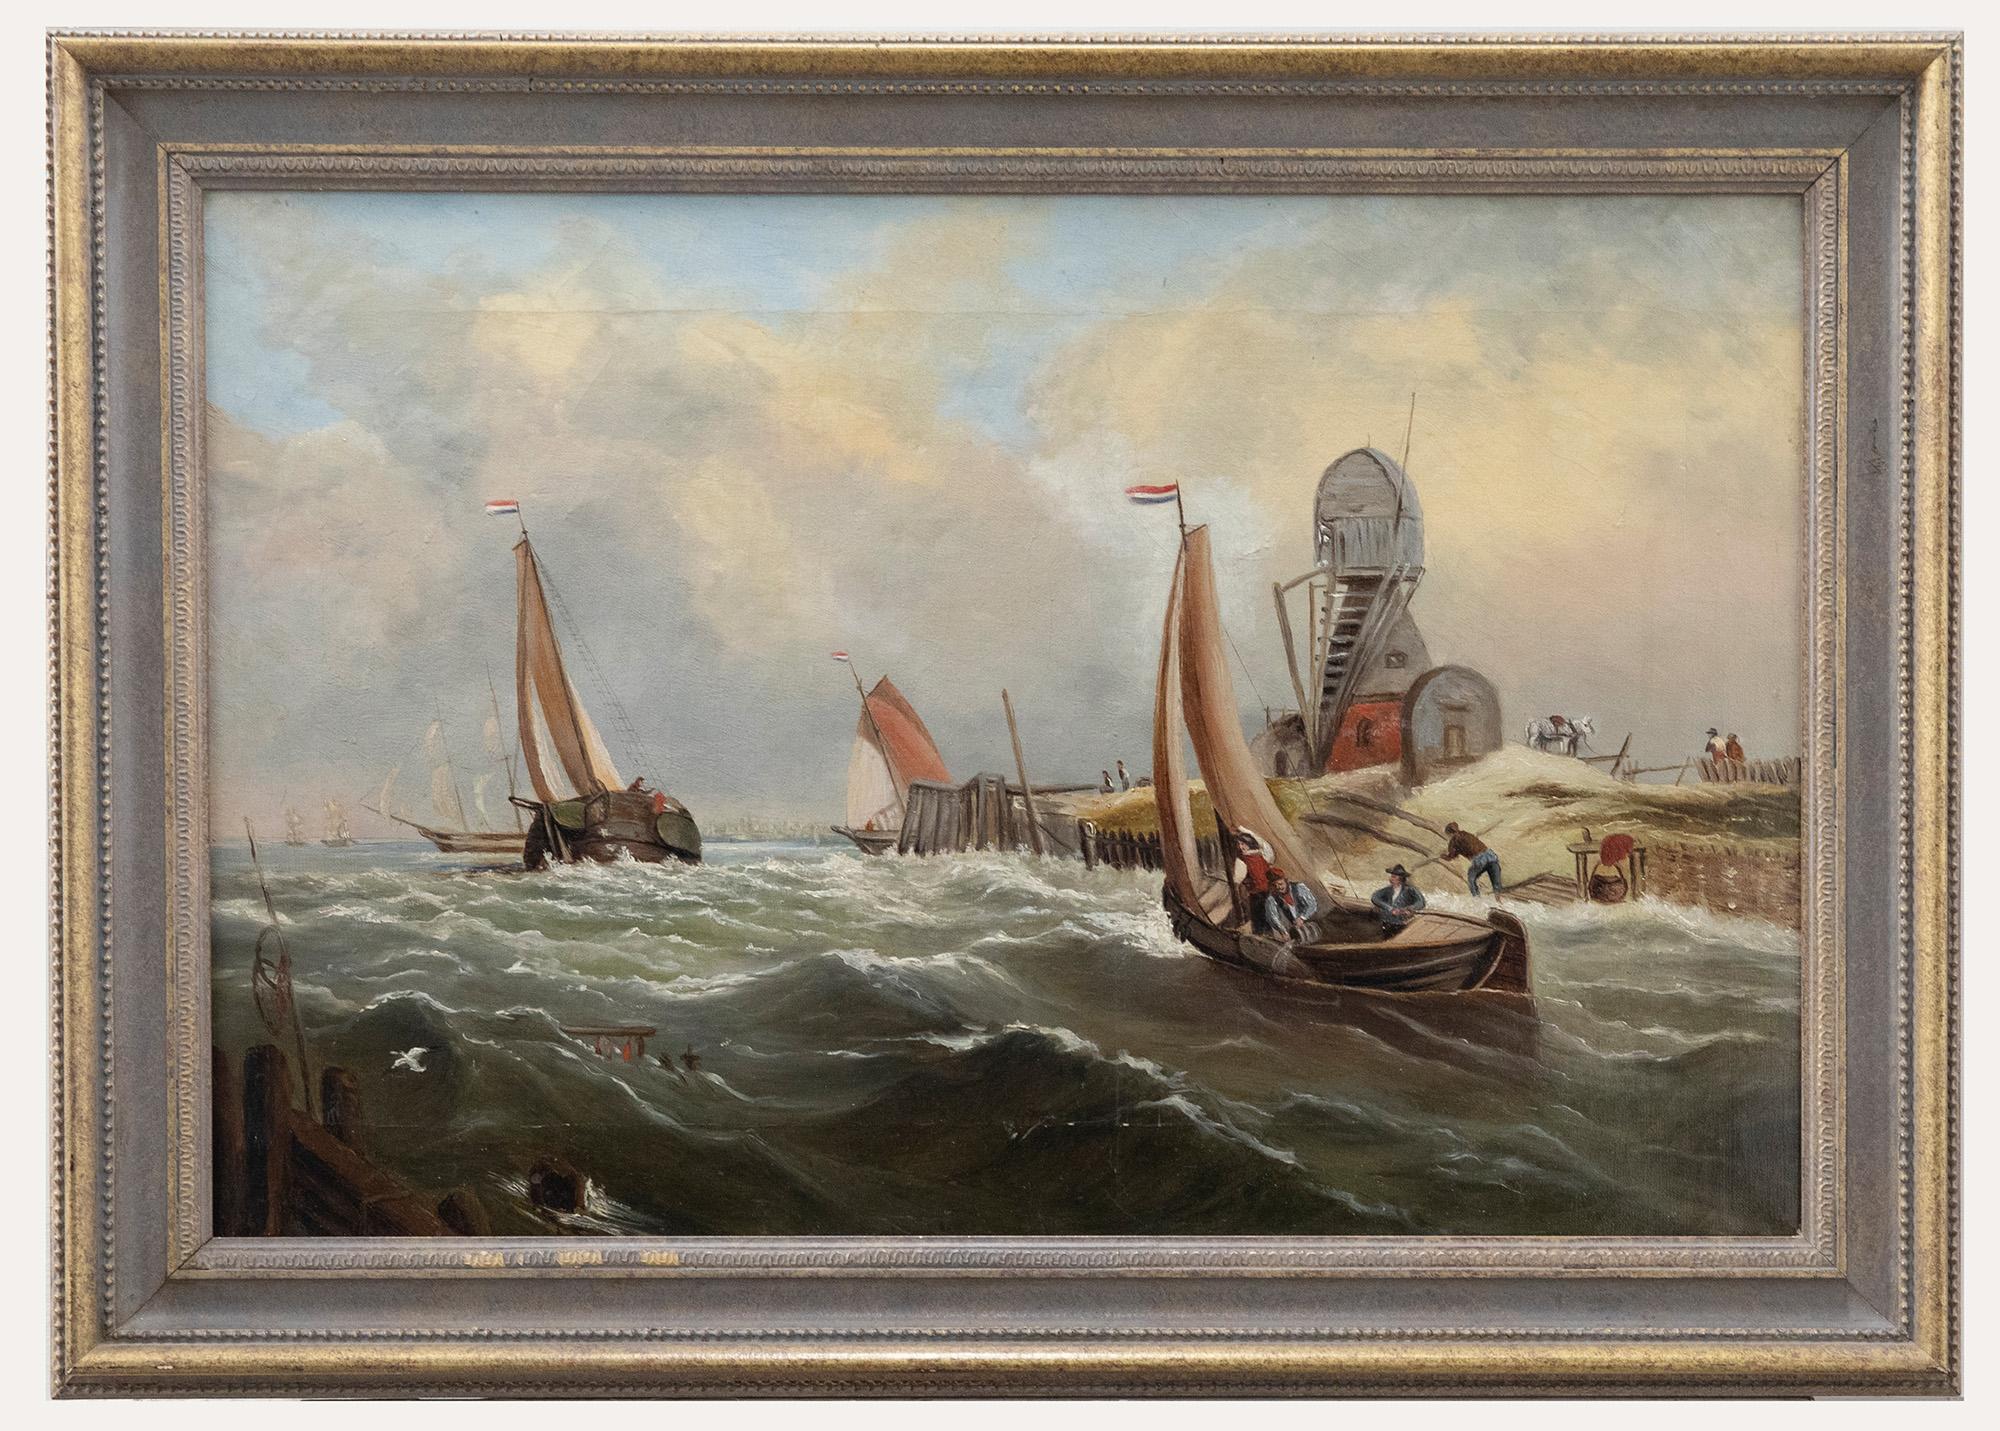 Unknown Figurative Painting - Framed Dutch School 19th Century Oil - Sailing through Rough Waters